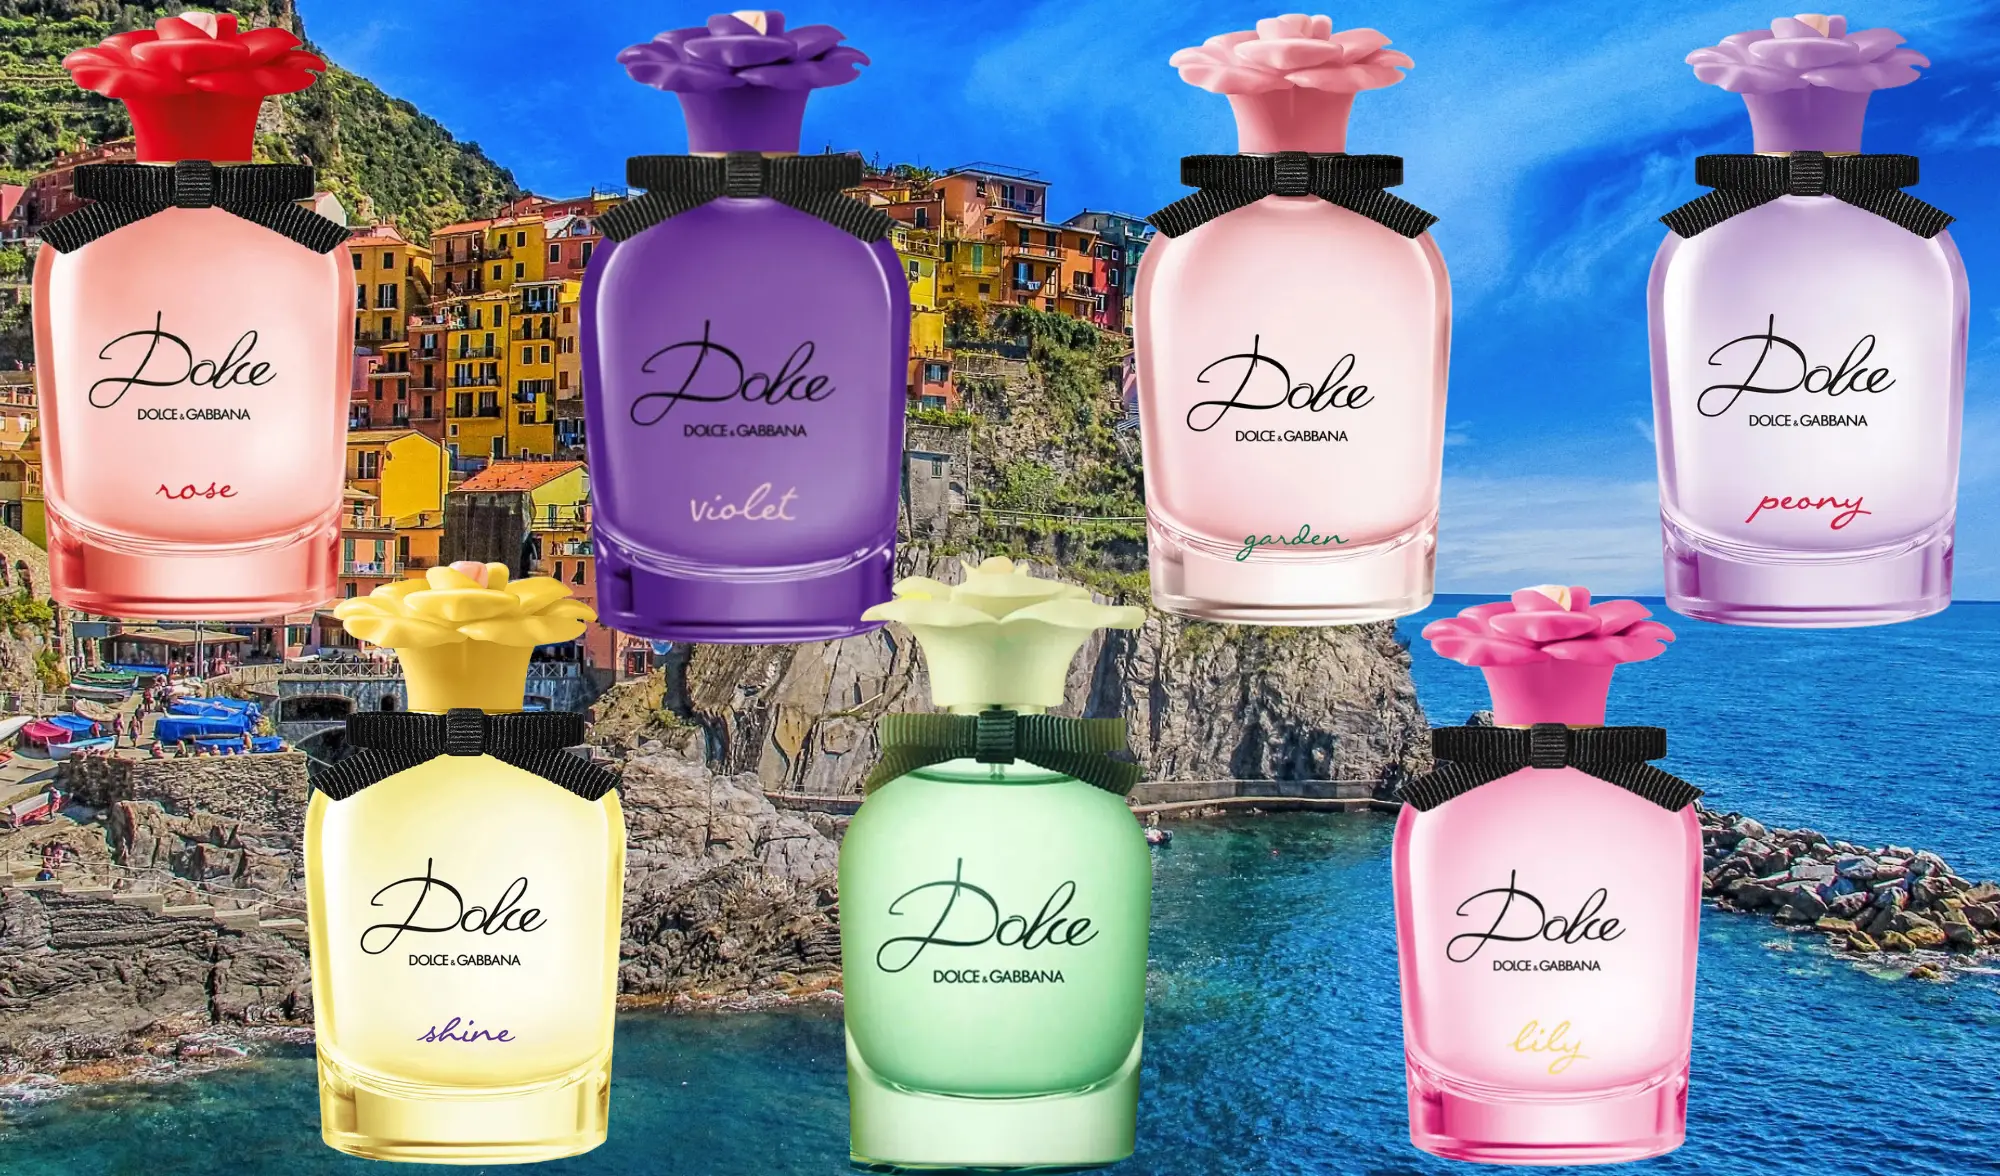 The Ultimate Guide To The Dolce & Gabbana Dolce Perfume Range